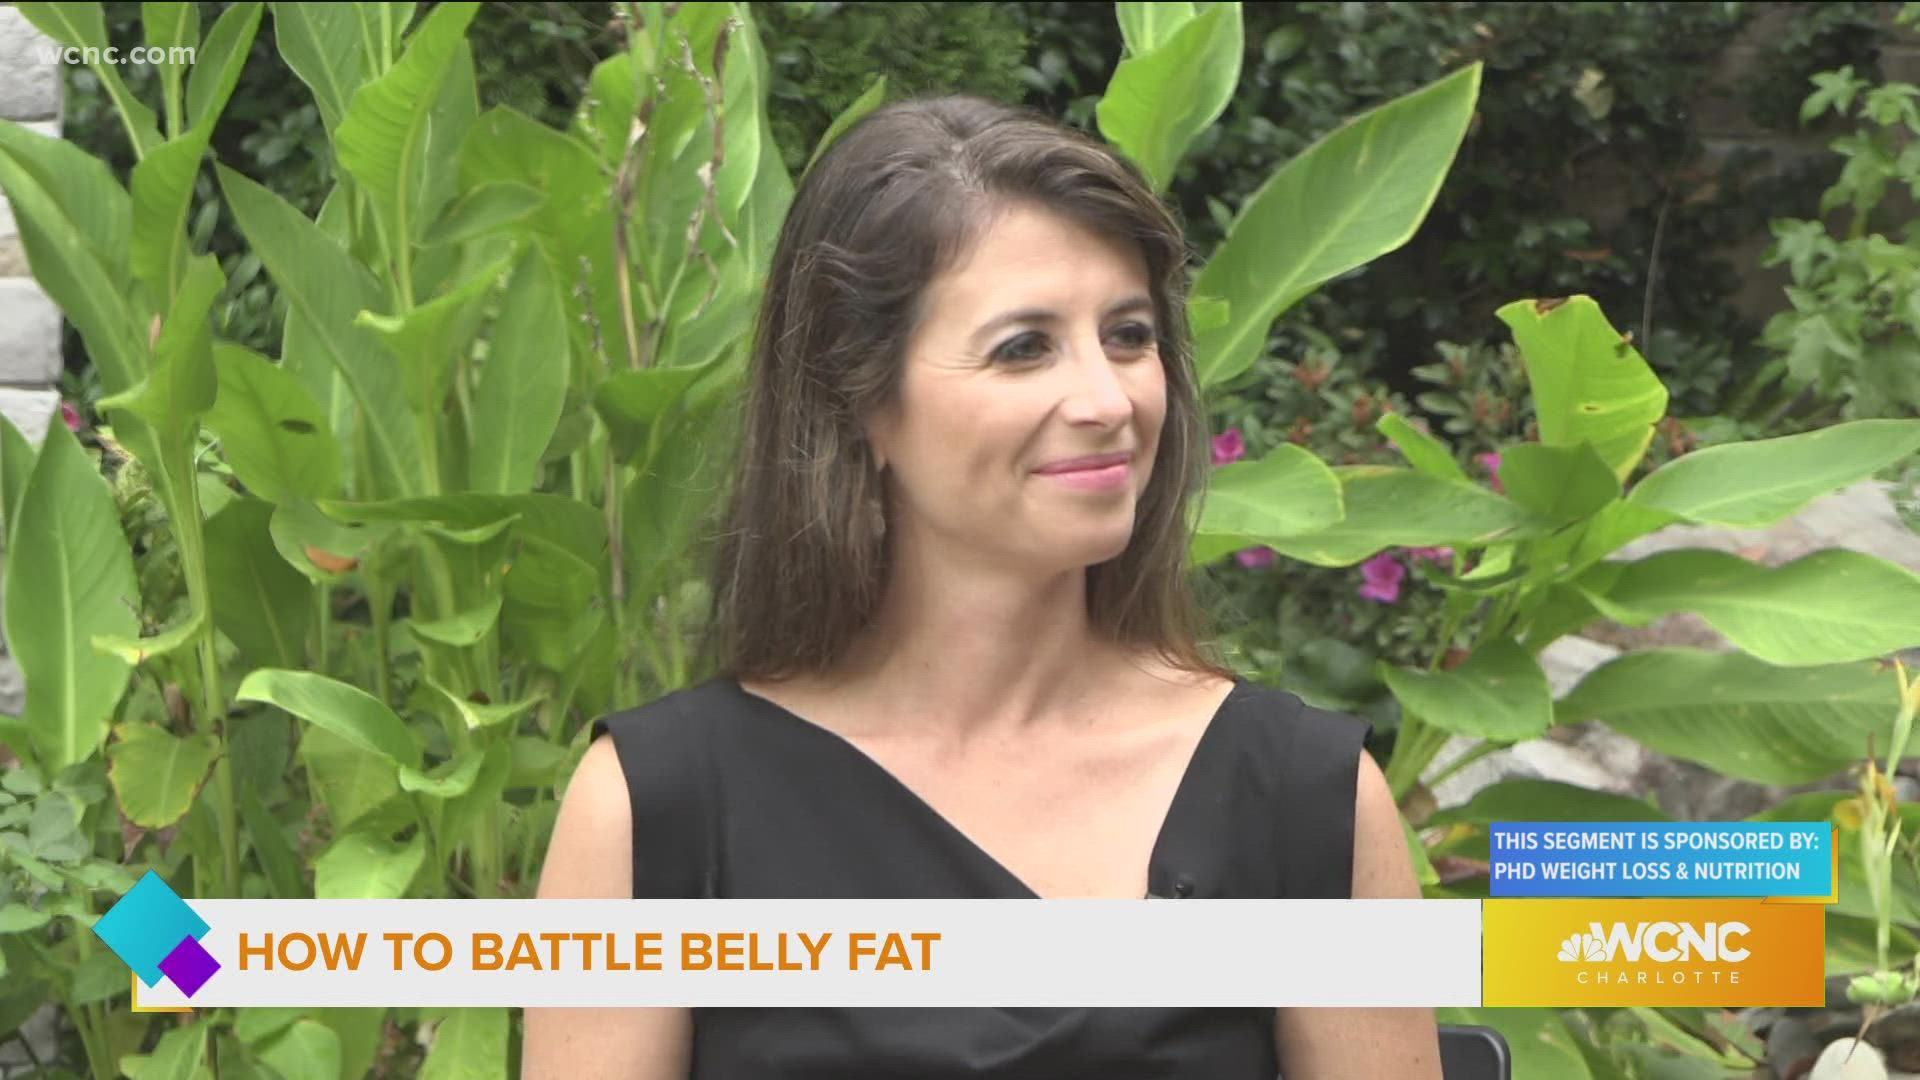 Dr. Ashley Lucas shares her tips for fighting off belly fat